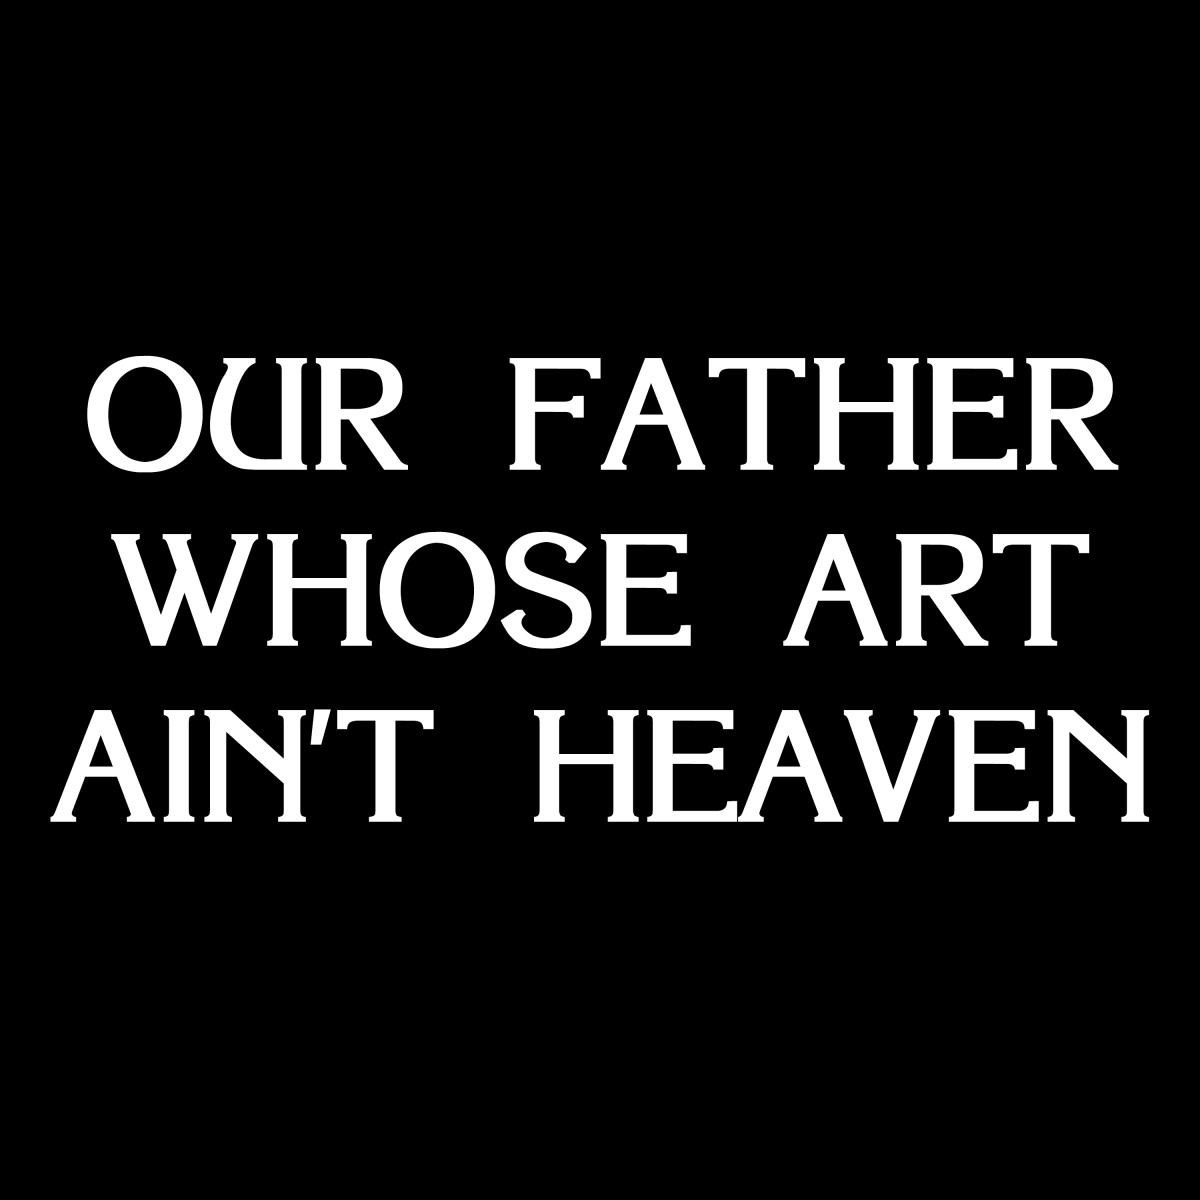 Our Father Whose Art Ain't Heaven